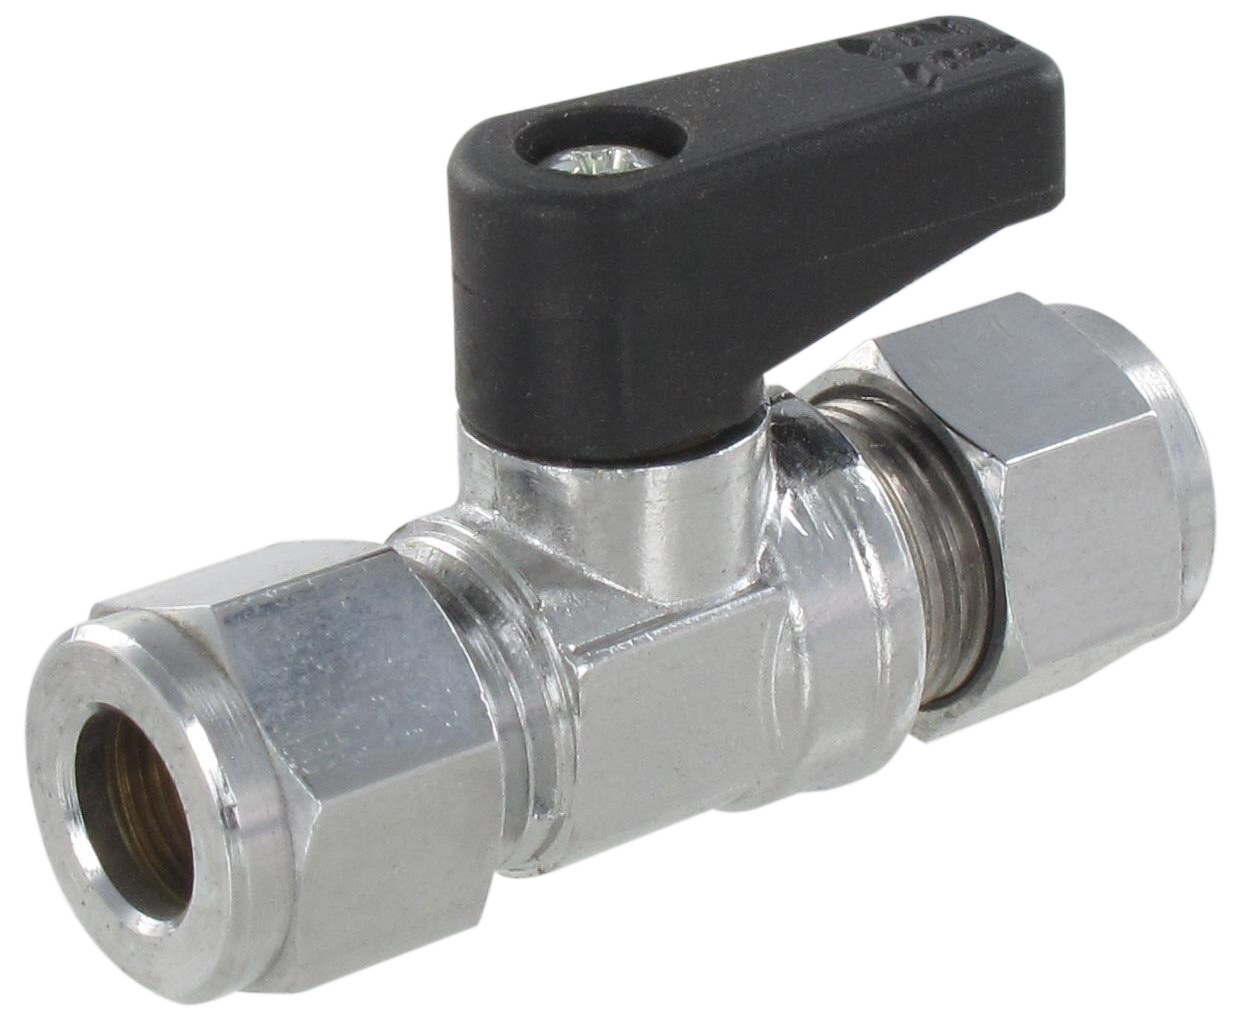 Ball valve with universal compression fittings T8 Nickel-plated brass ball valves